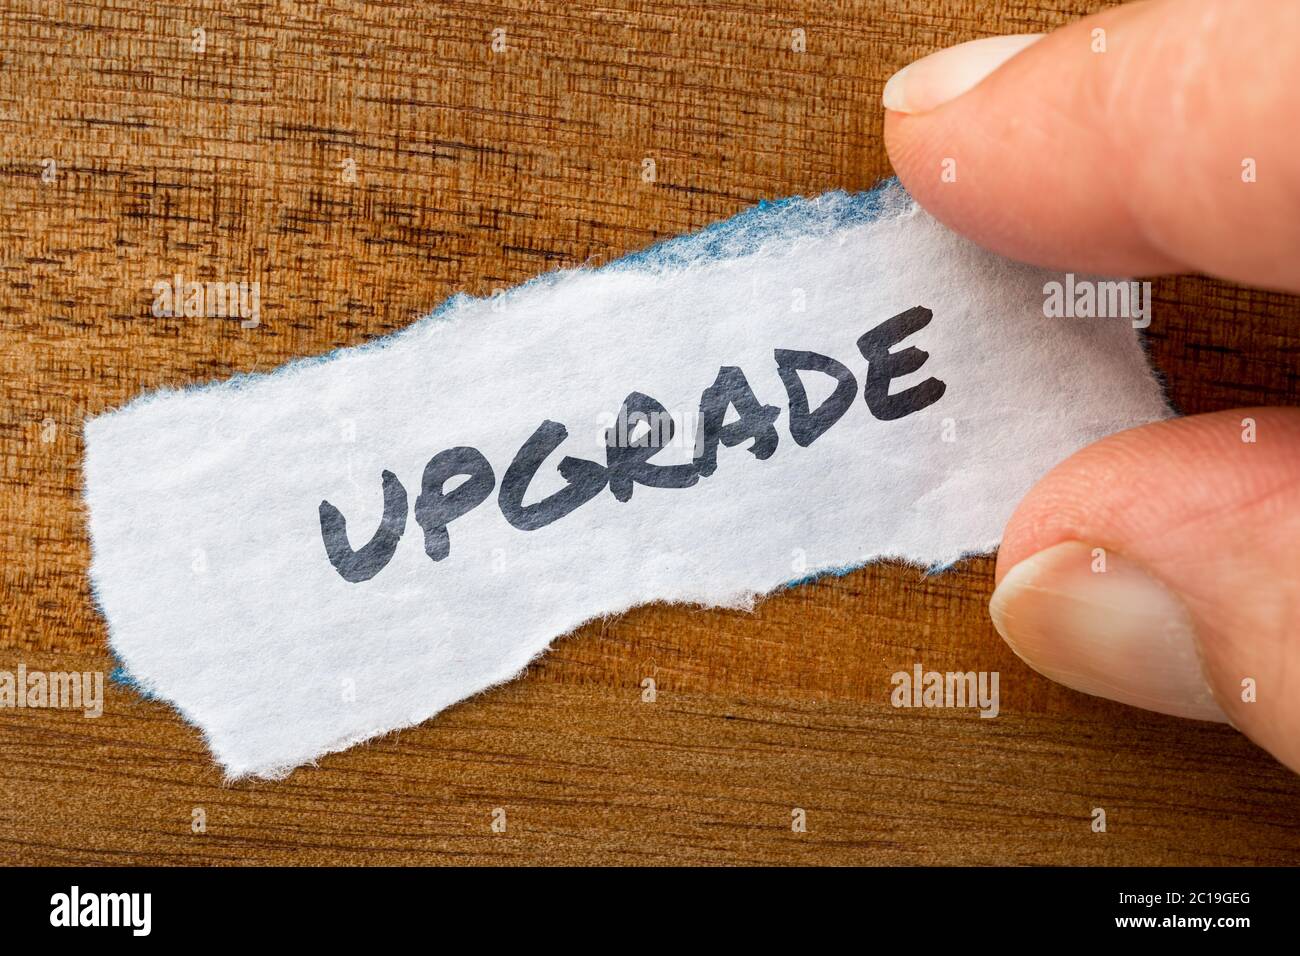 Upgrade concept and theme written on old paper on a grunge background Stock Photo